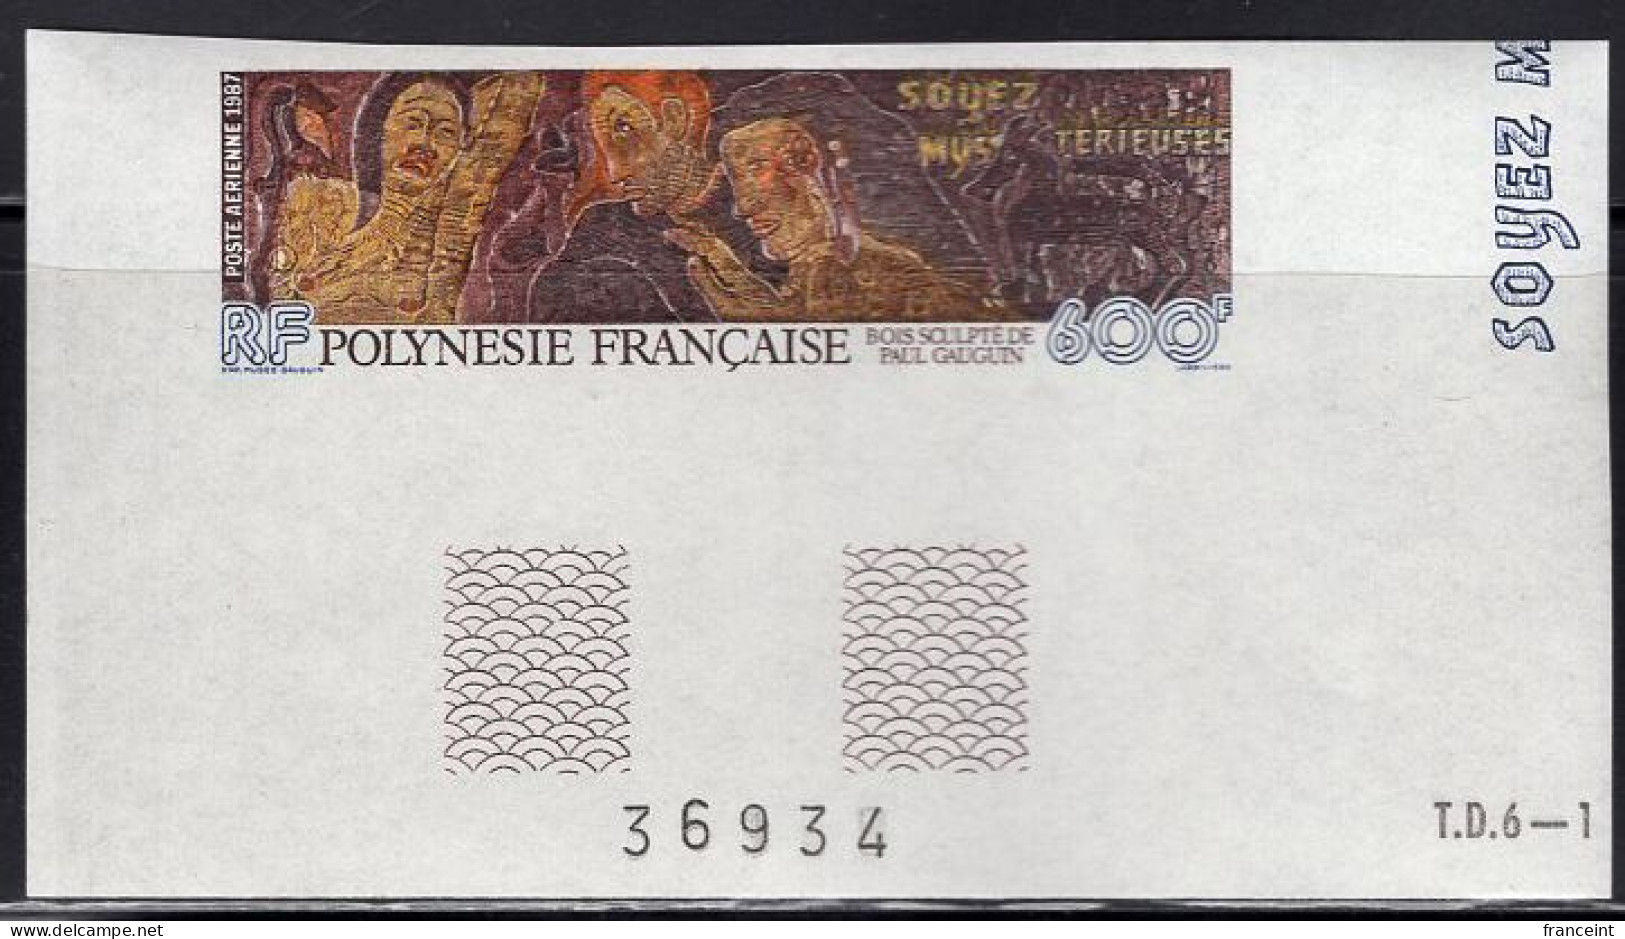 FRENCH POLYNESIA(1987) "Soyez Mysterieusses" By Gauguin. Corner Imperforate. Scott No C227, Yvert No PA198. - Imperforates, Proofs & Errors